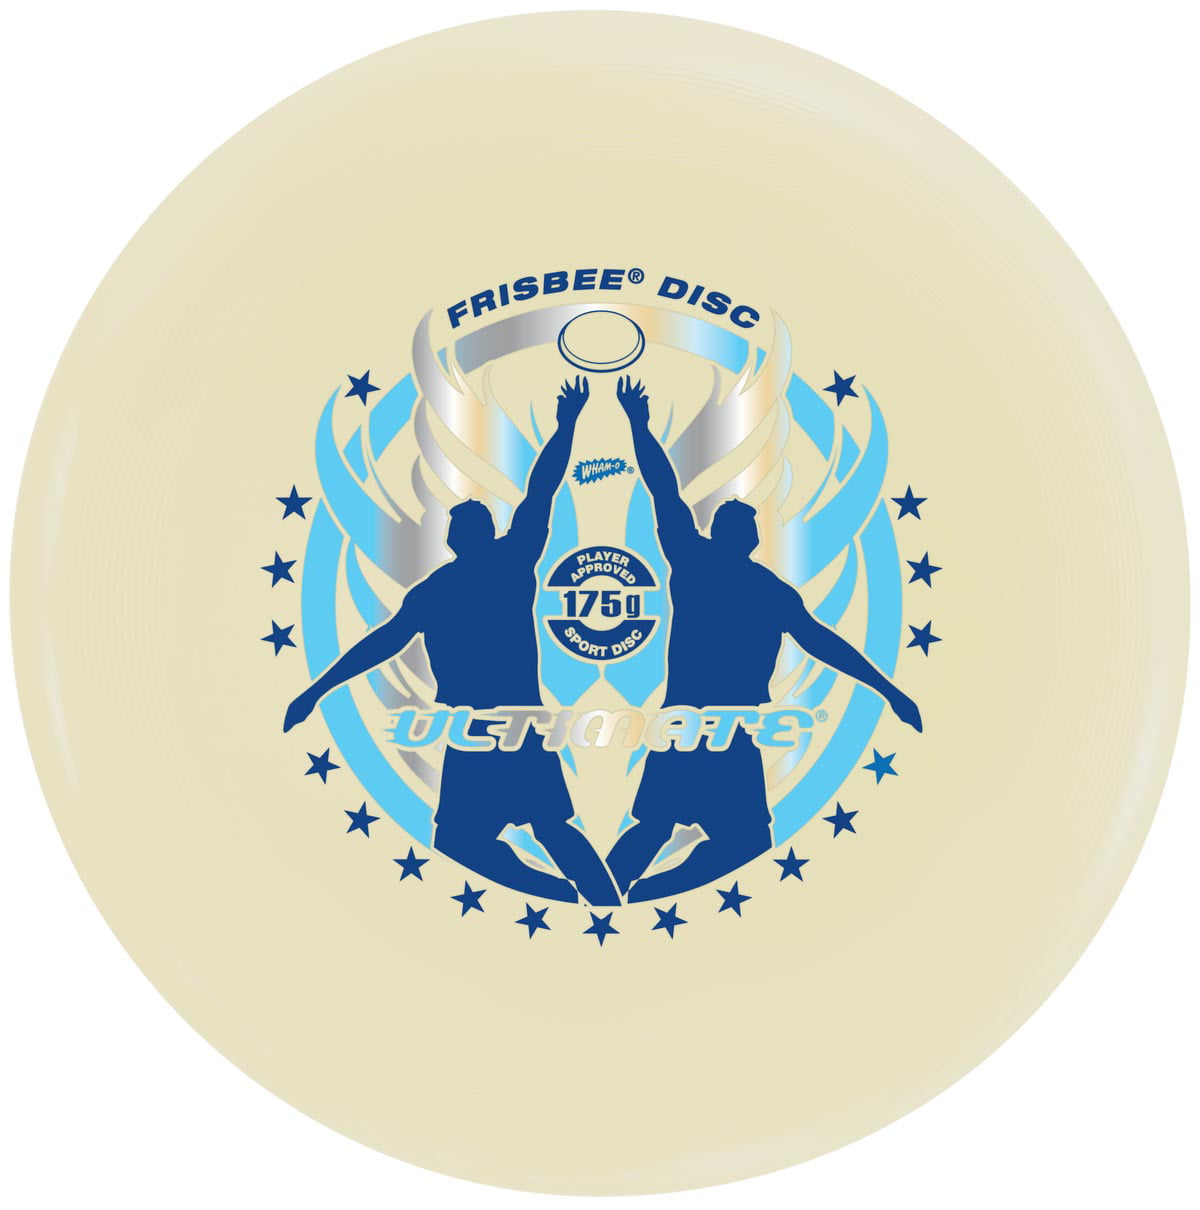 Wham-O Ultimate Frisbee 175g Sports Disc Blue and White for sale online 